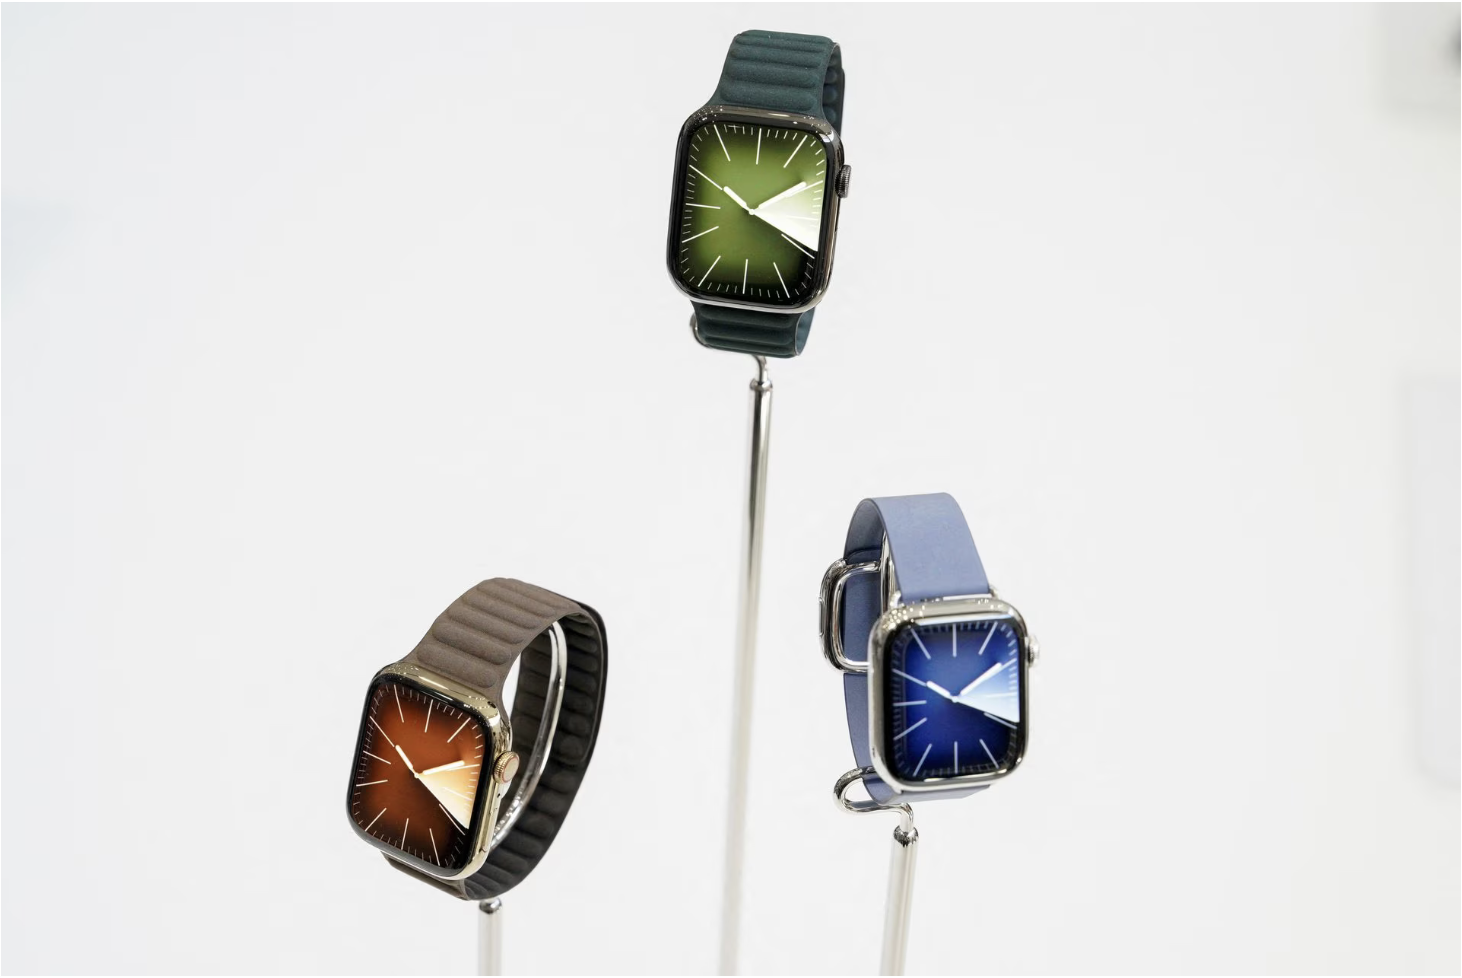 Apple's plan for climate-friendly watches: Clean energy in factories